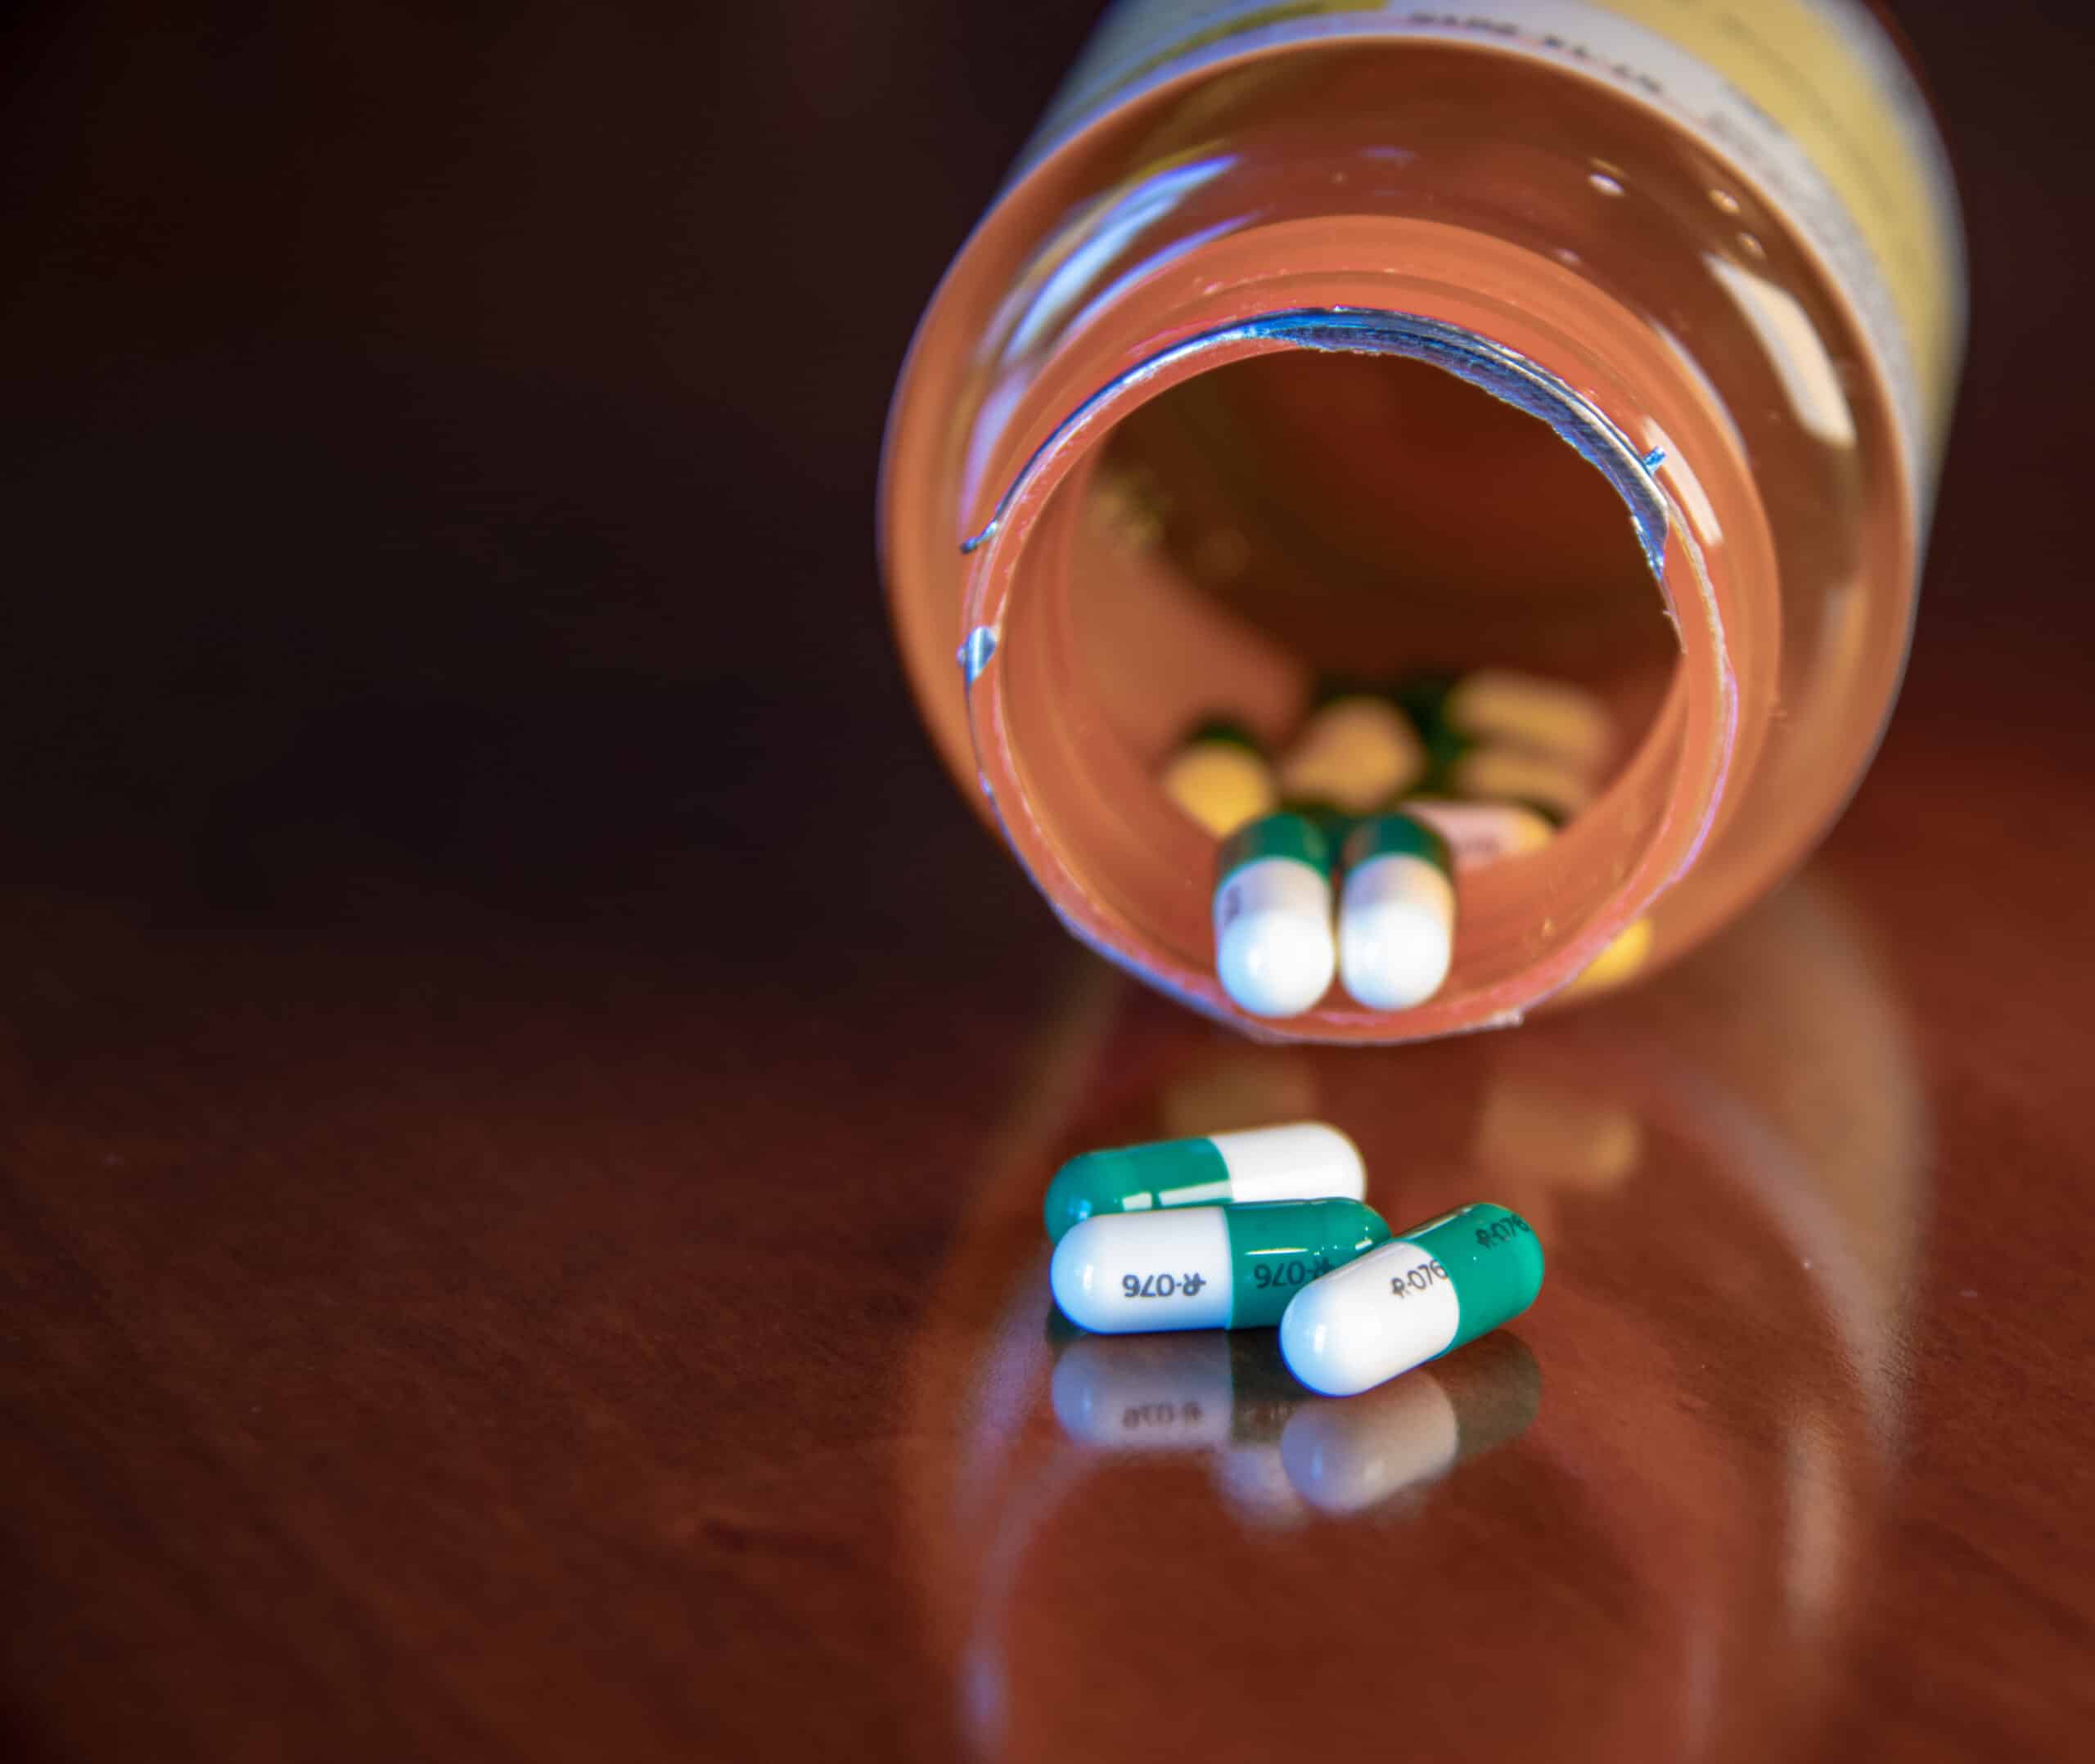 A tipped over pill bottle on a wooden table with green and white pills spilled out. It represents Restoril vs Ambien, both drugs to treat insomnia.